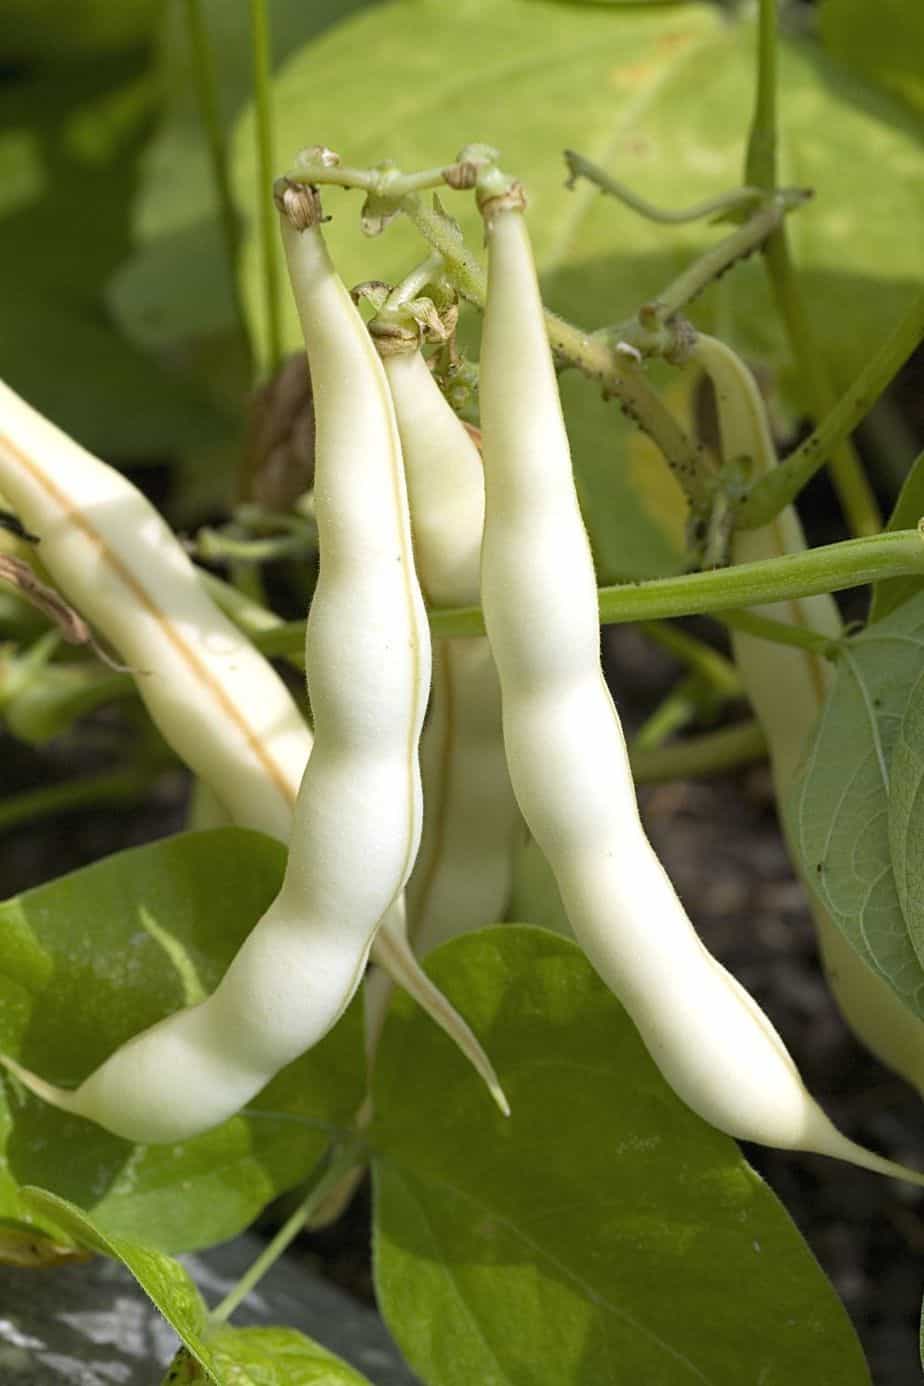 Beans are medium maintenance vegetables that you can grow in raised beds